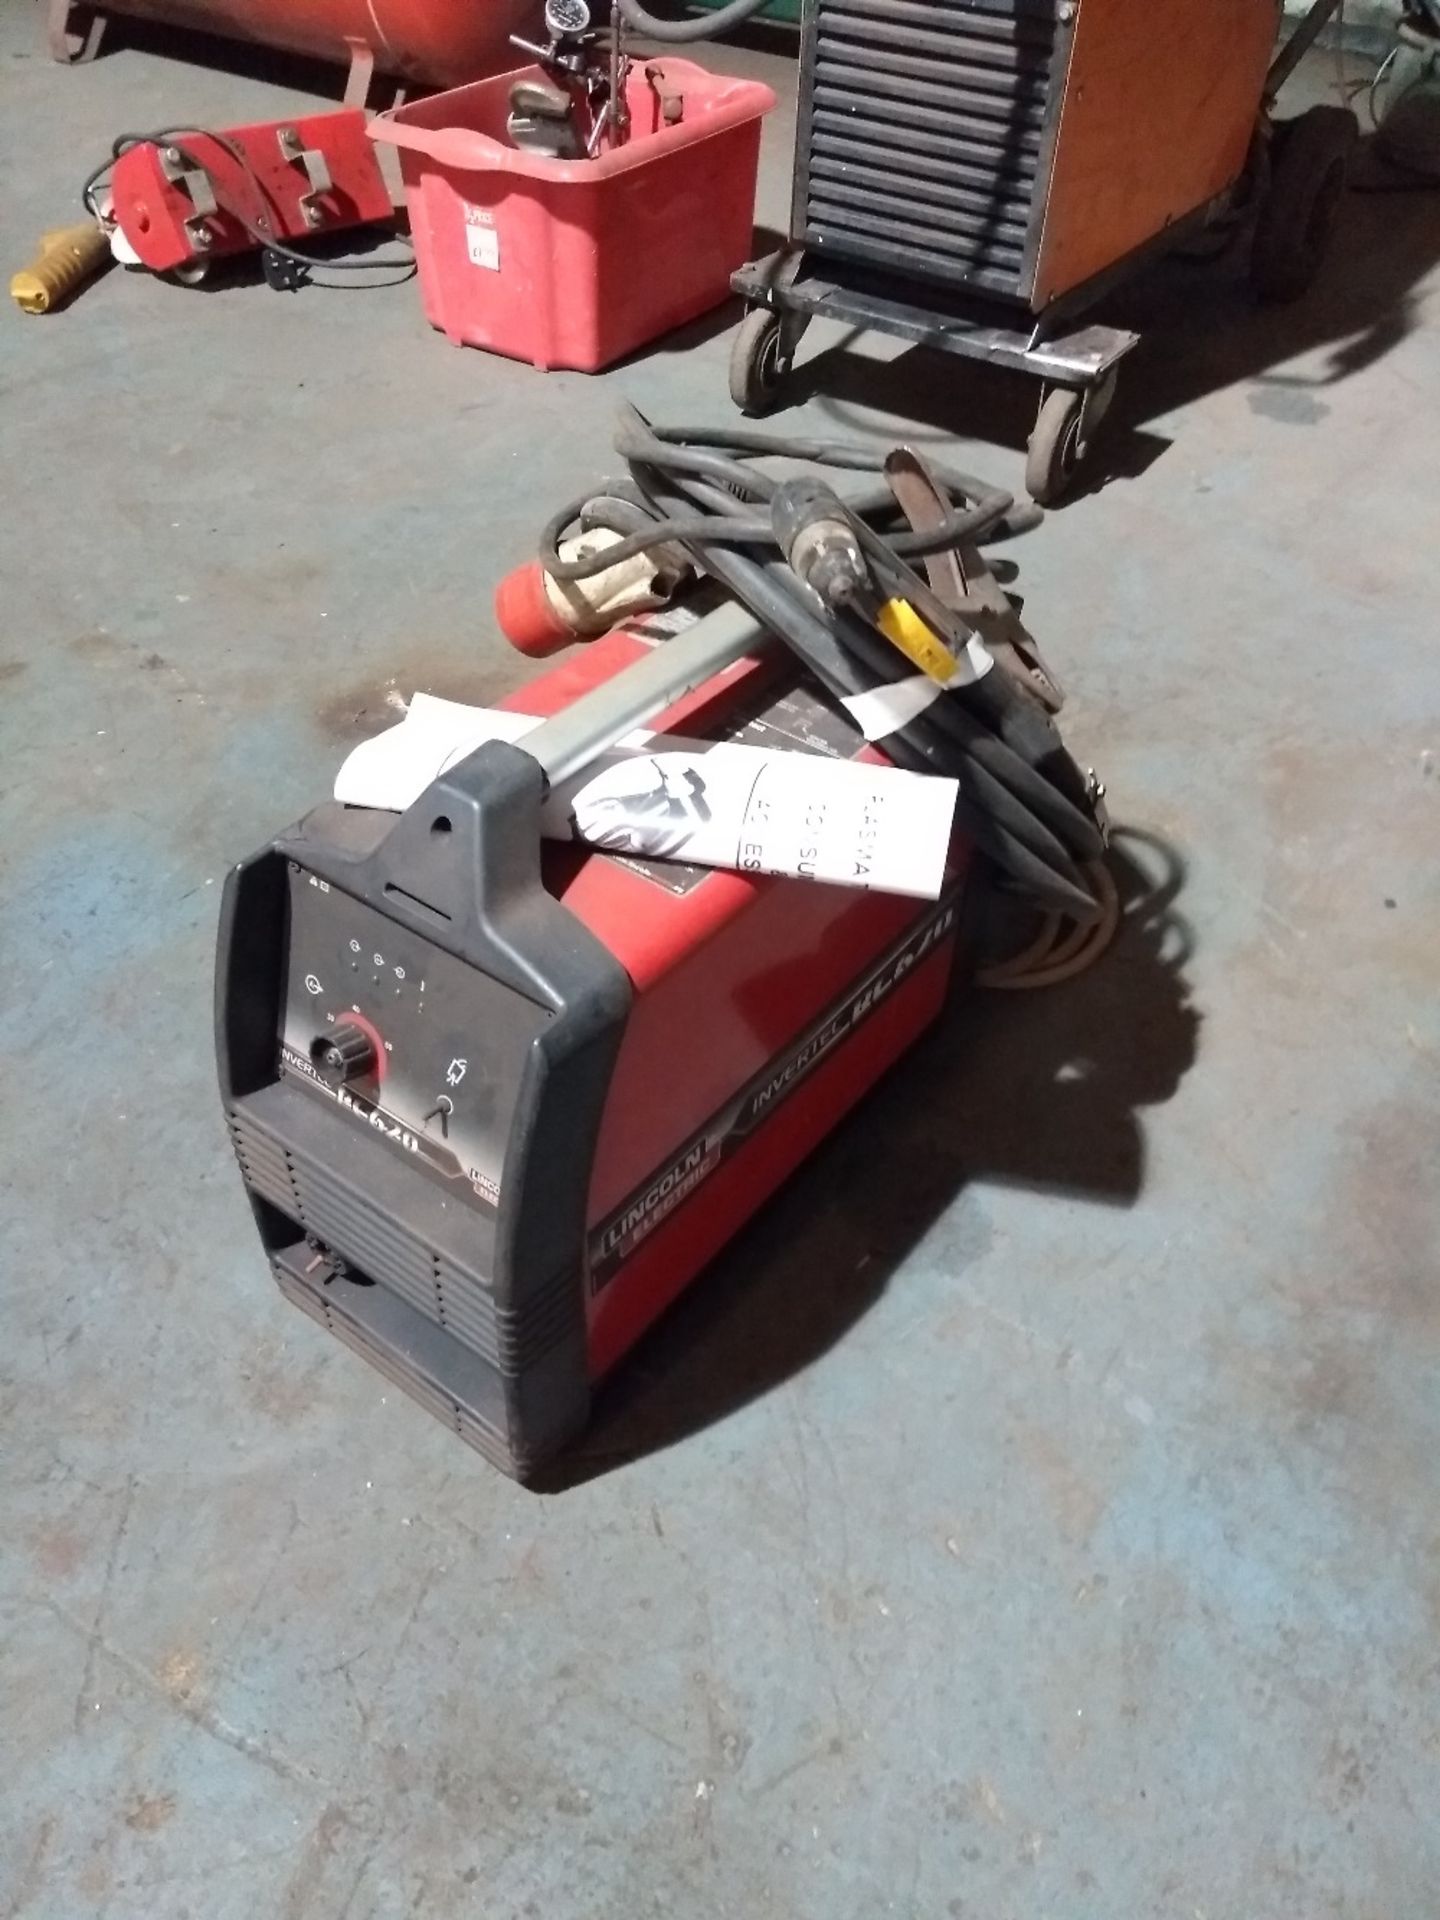 Lincoln electric Invertec PC620plasma cutter 3 phase. Electrical Safety Test Passed (2.8.19).